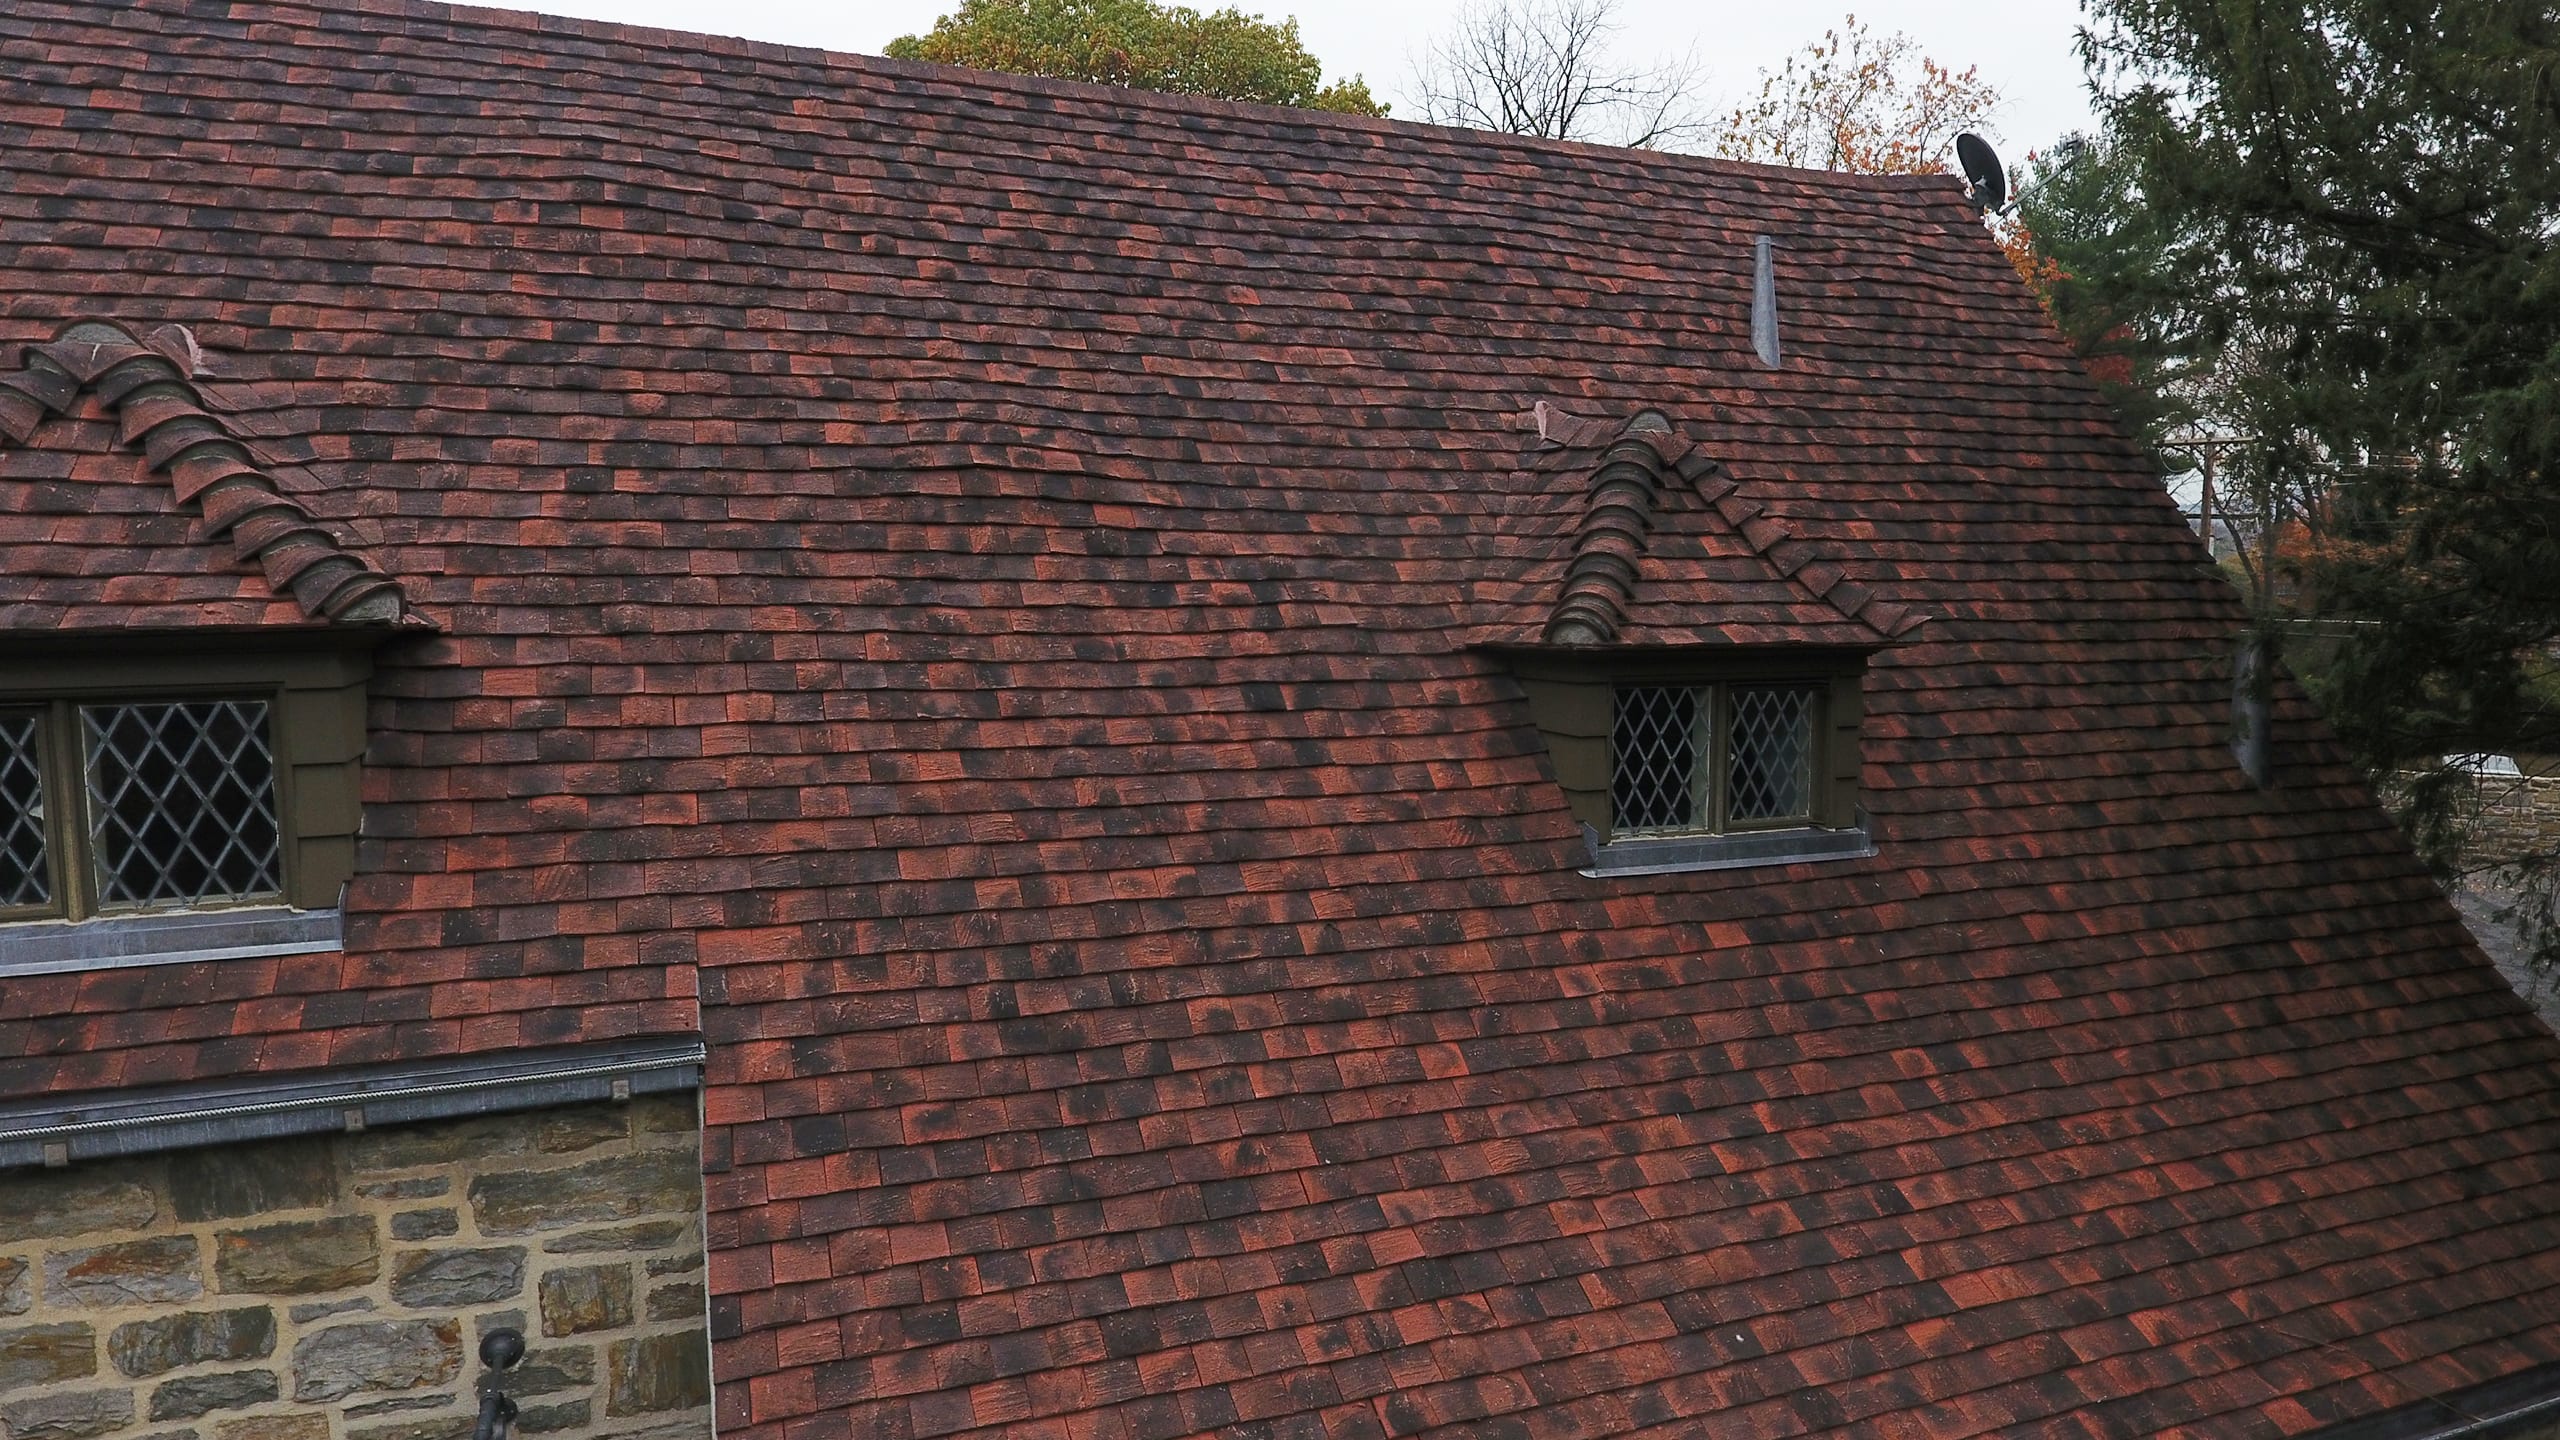 Private Residence in Wyomissing, PA featuring Ludowici clay roof tile